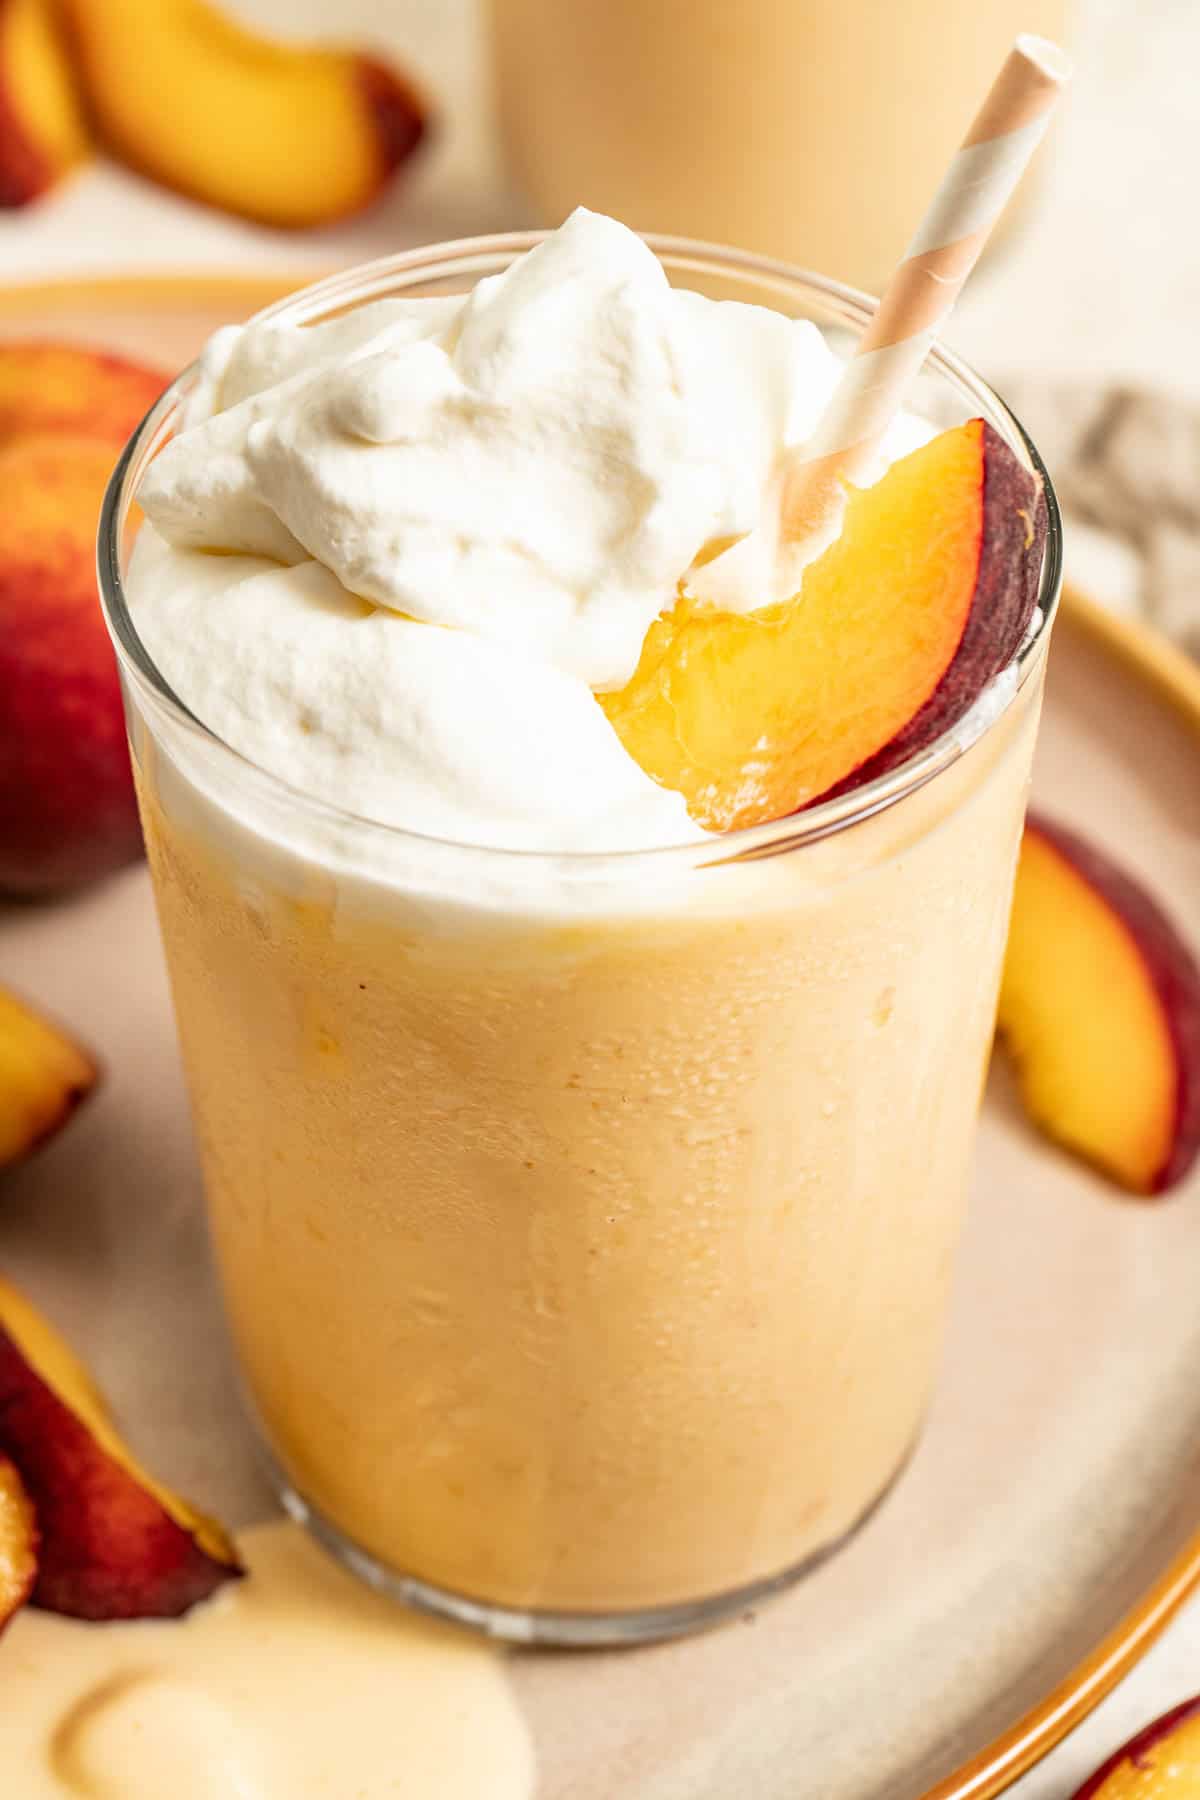 A light yellow milkshake topped with fresh whipped cream, a slice of peach, a straw.